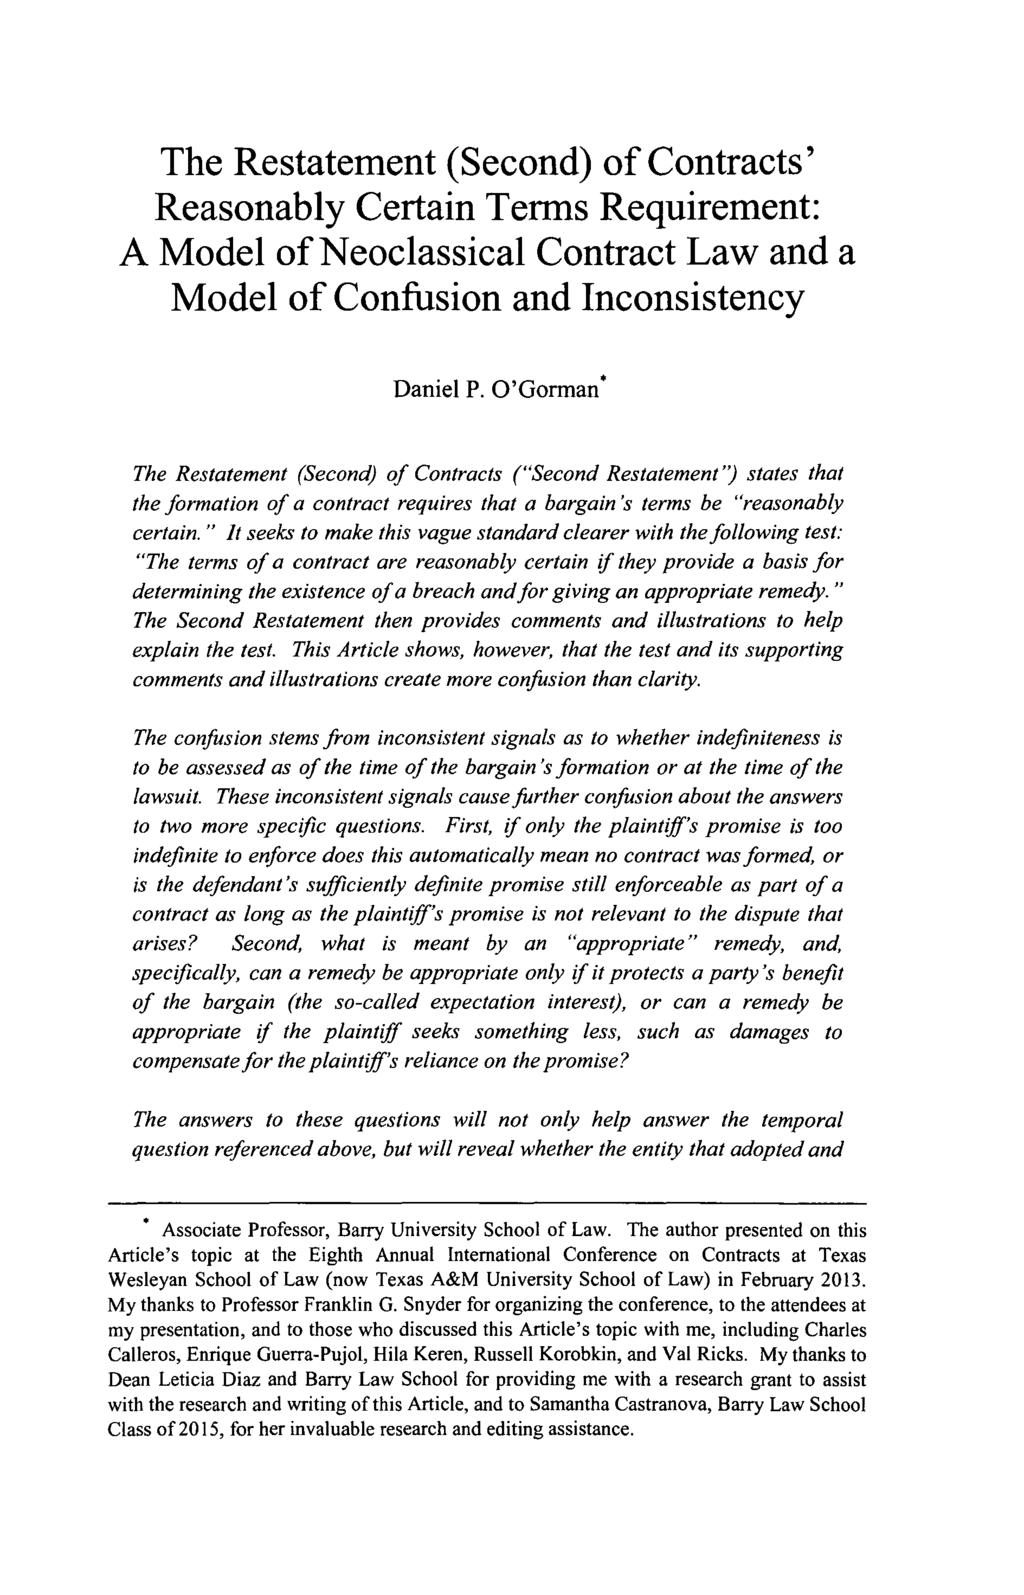 The Restatement (Second) of Contracts' Reasonably Certain Terms Requirement: A Model of Neoclassical Contract Law and a Model of Confusion and Inconsistency Daniel P.